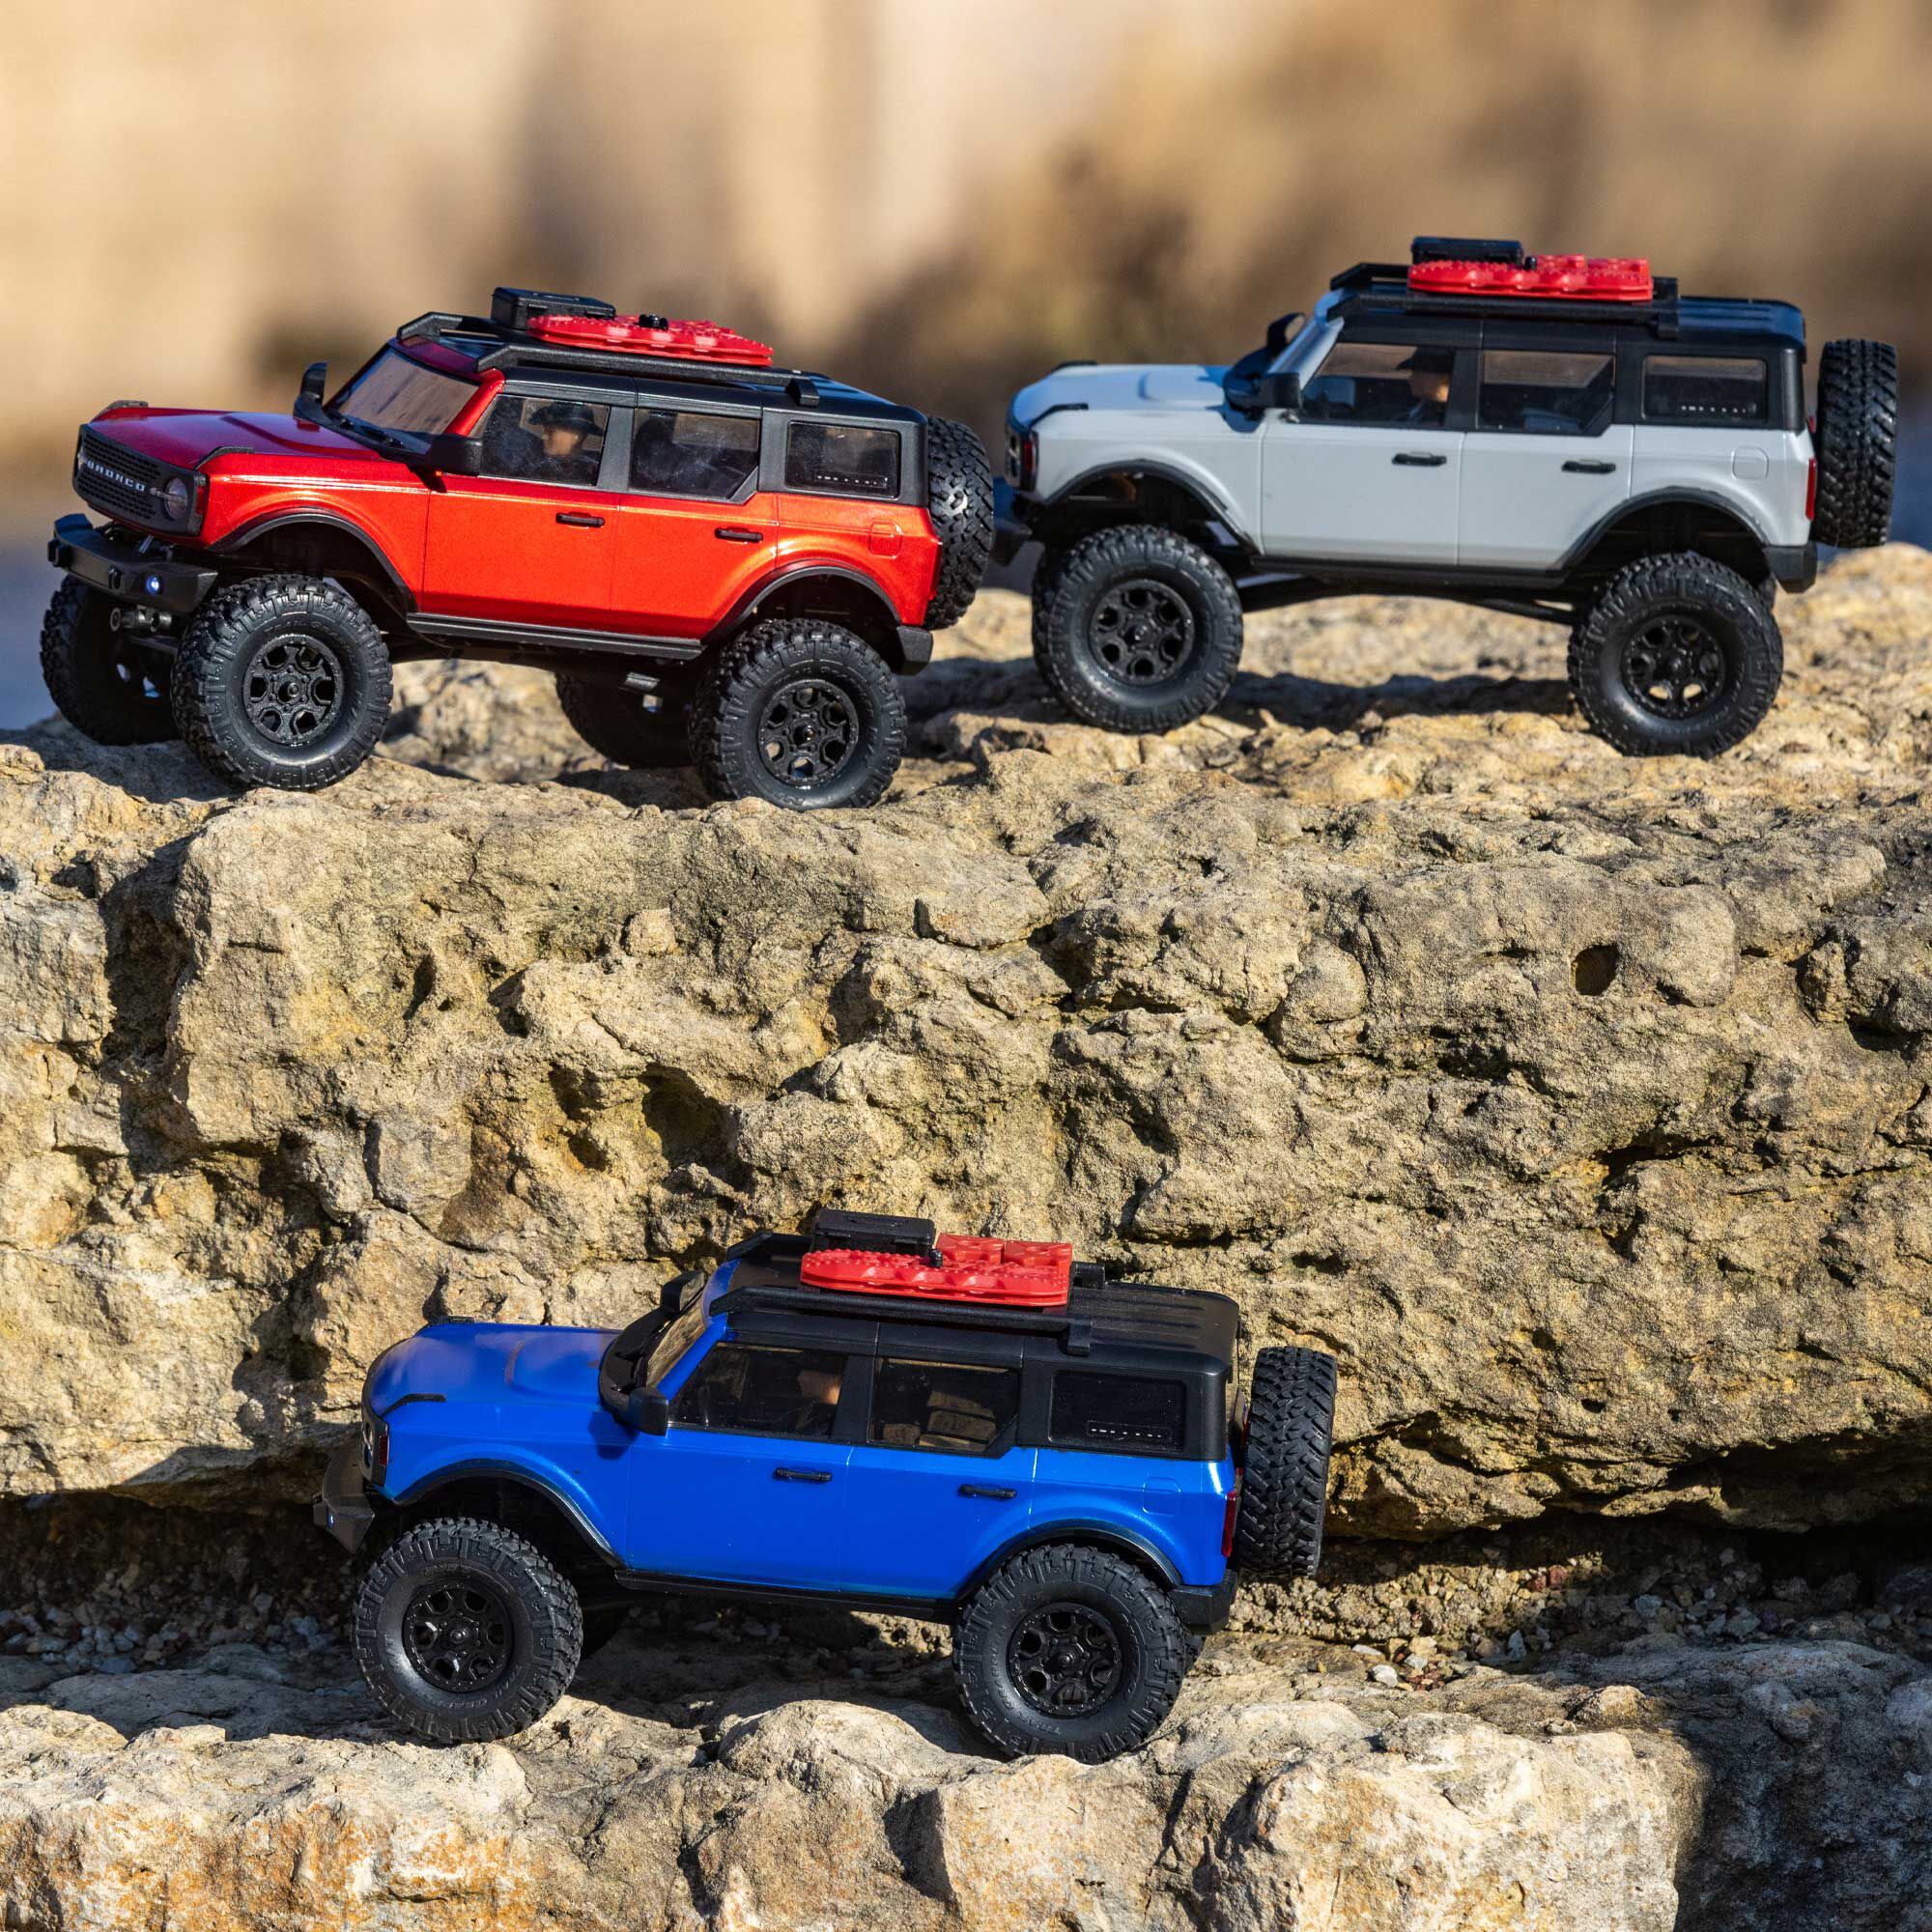 1/24 The 3th generation of heavy-duty off-road vehicles model 